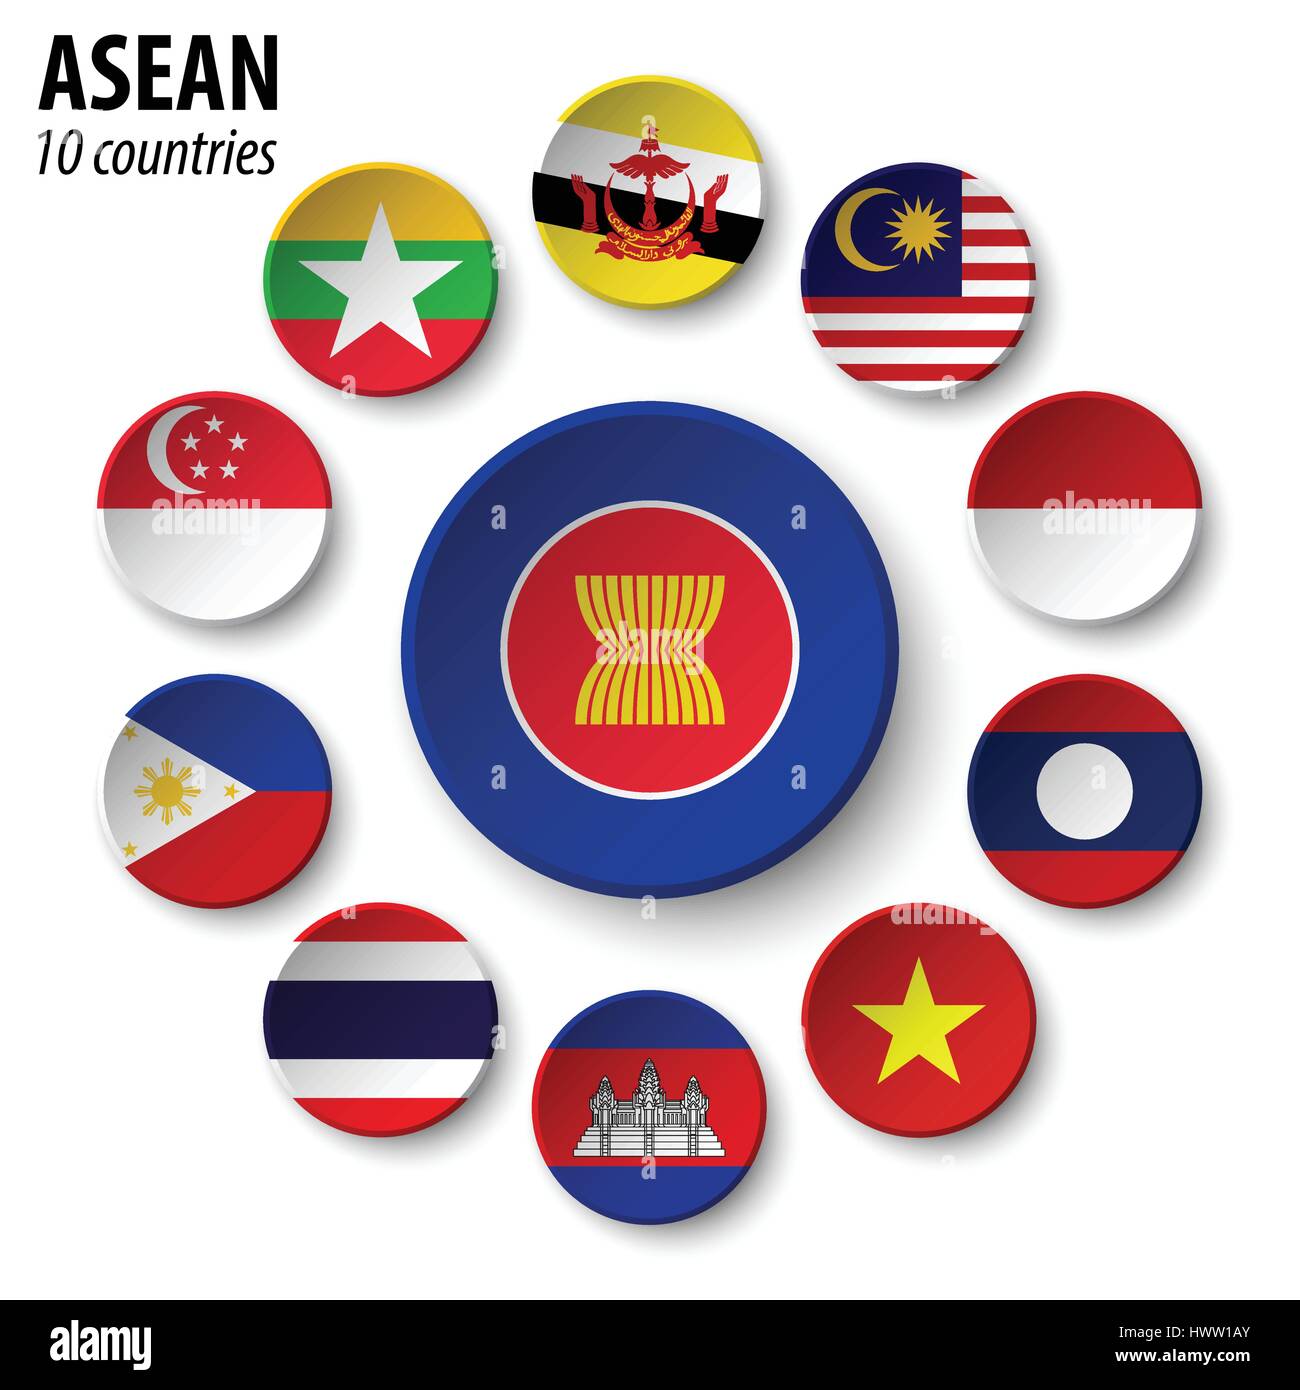 ASEAN ( Association of Southeast Asian Nations ) and membership . Stock Vector